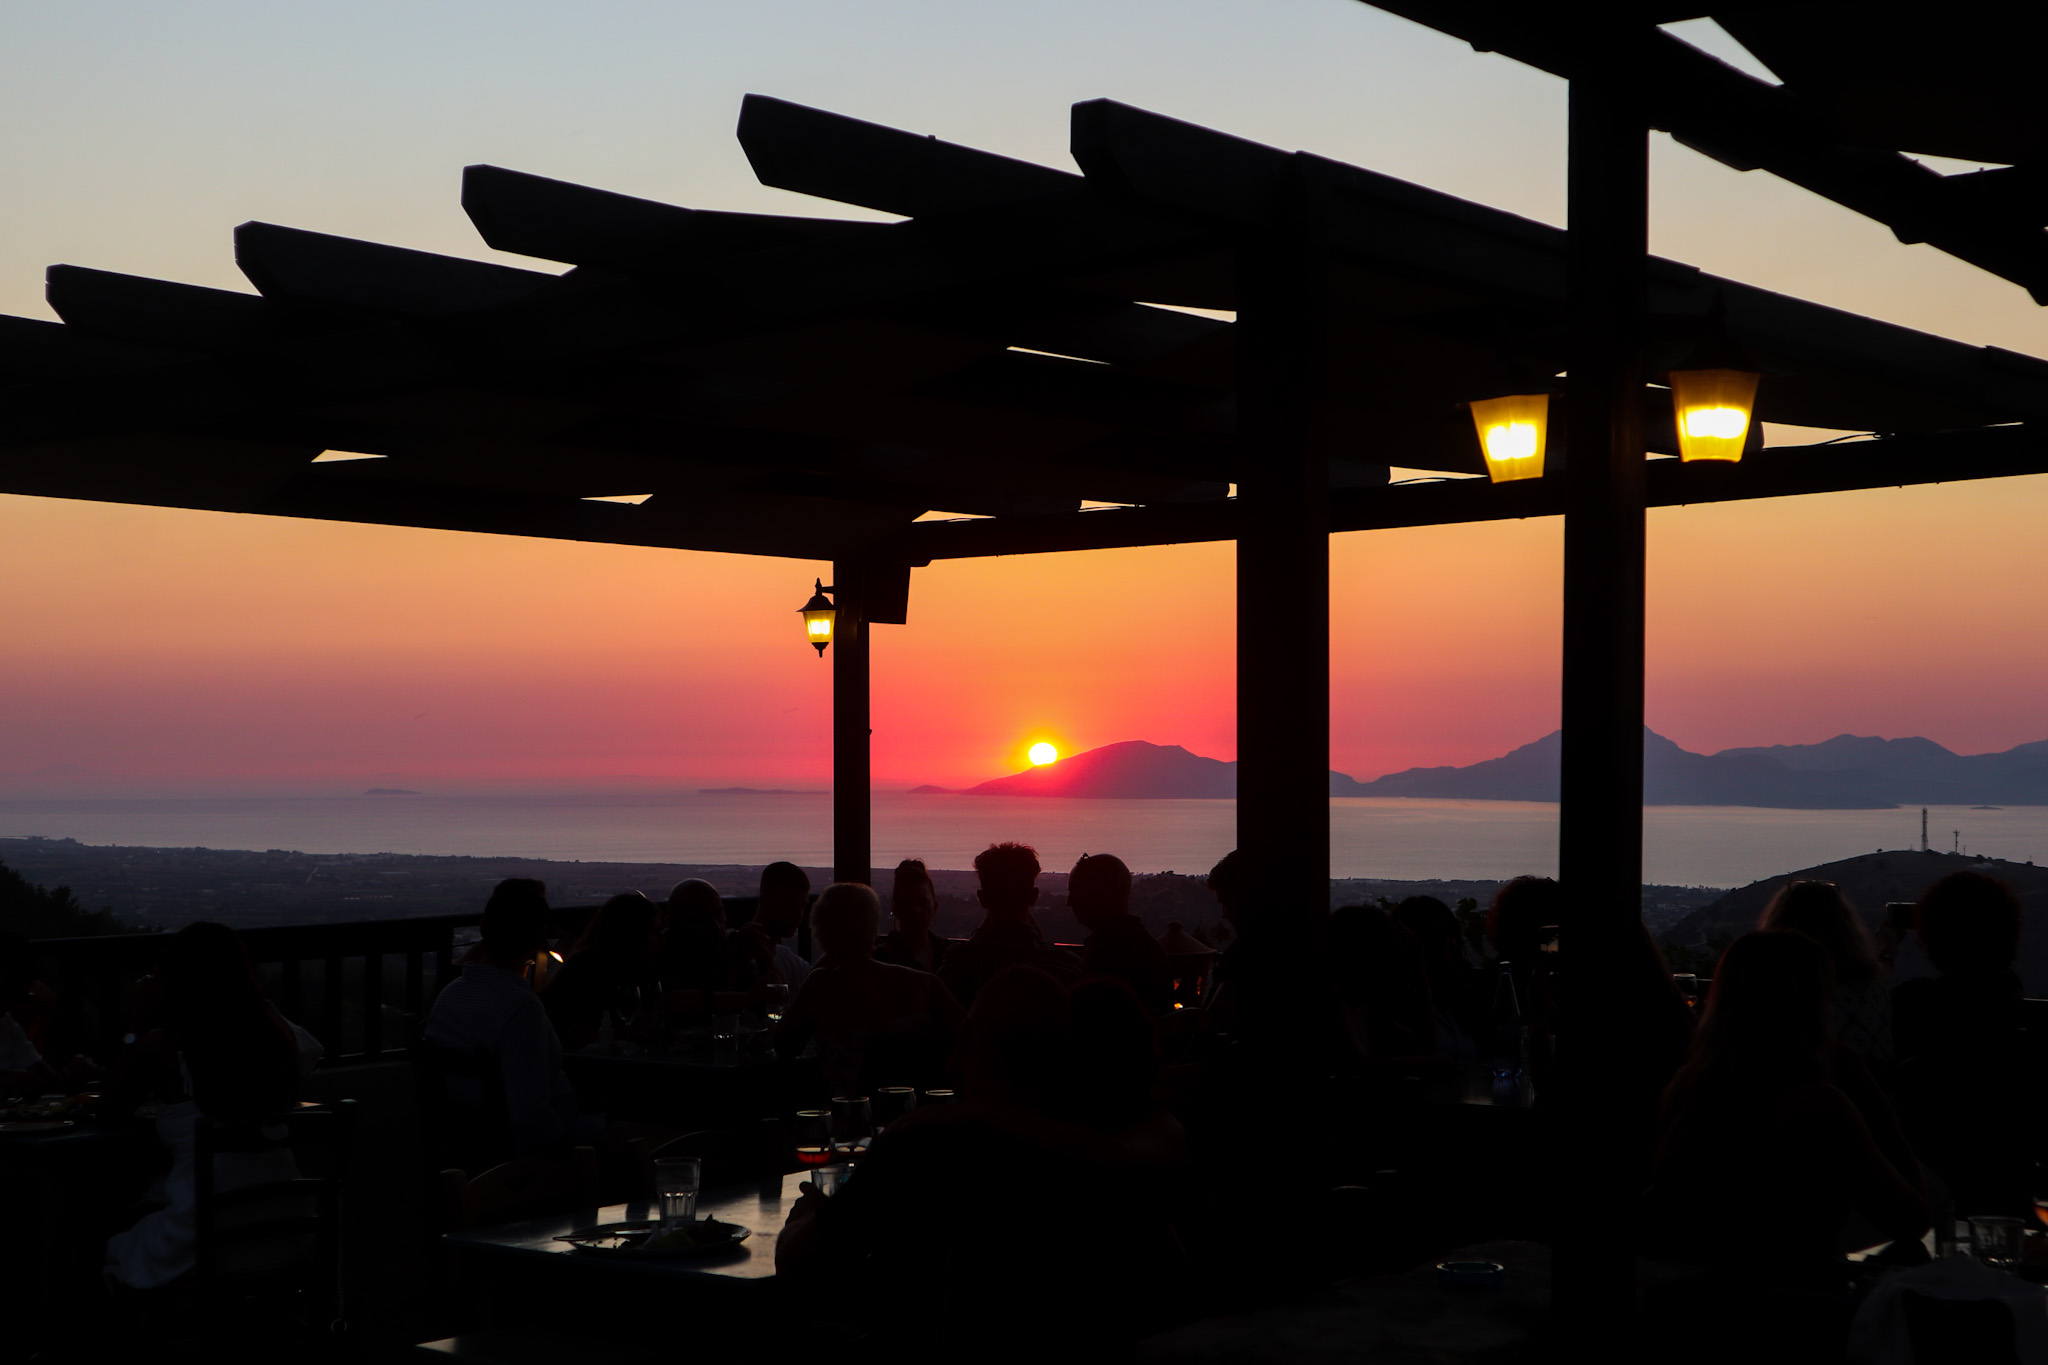 Sunset at a restaurant in Zia